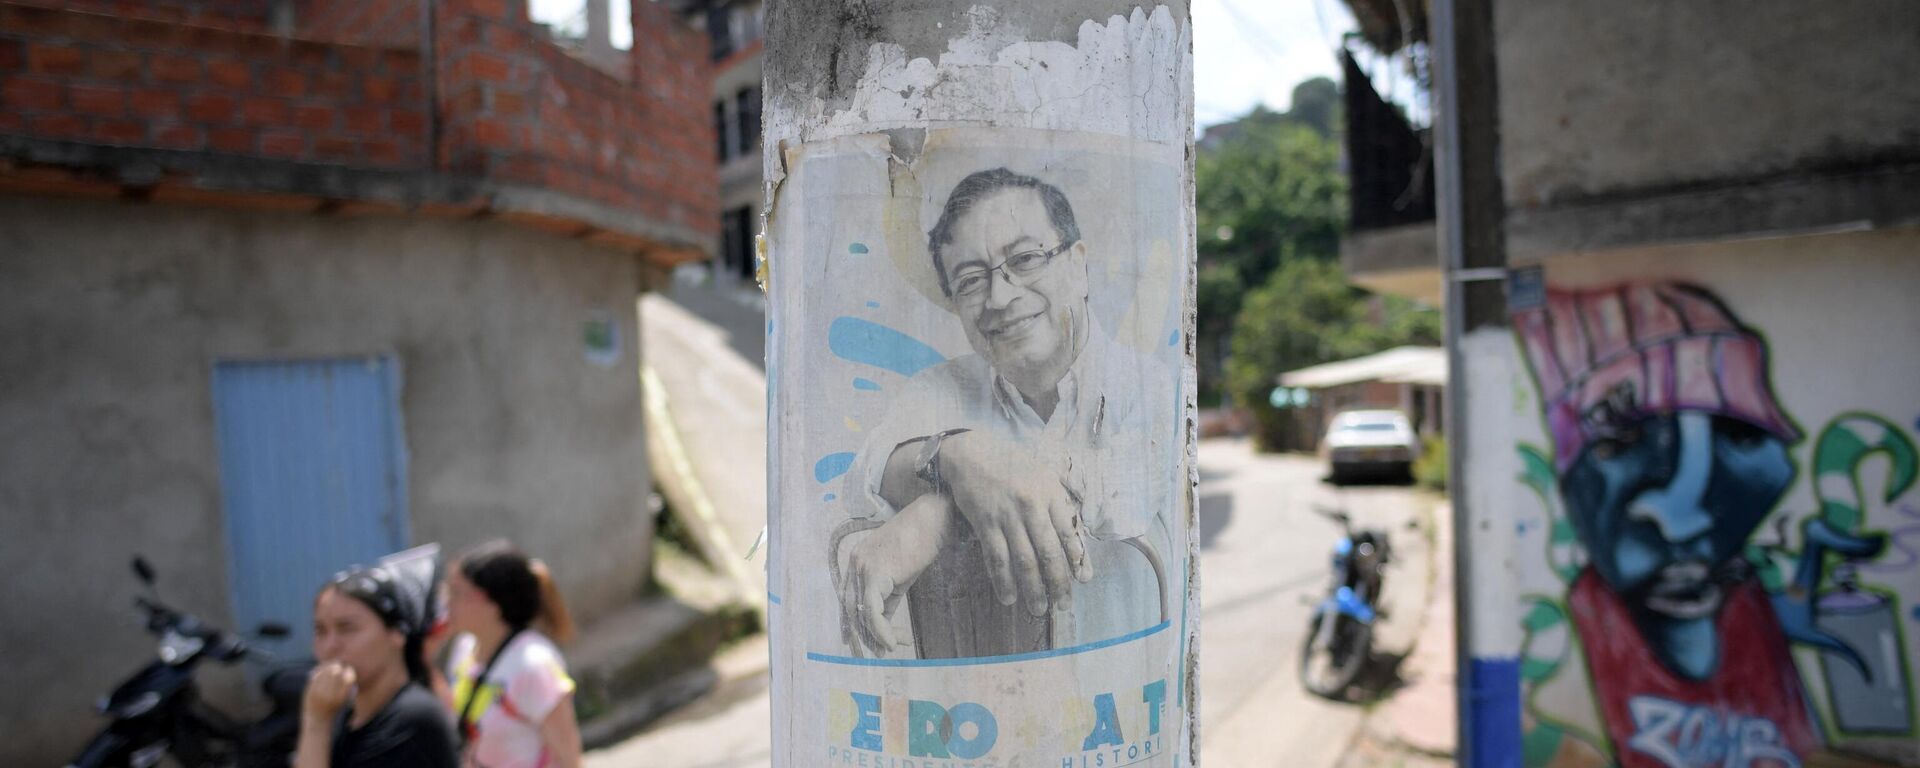 People walk near propaganda depicting Colombian left-wing presidential candidate Gustavo Petro  at the Siloe shantytown in Cali, Colombia, on May 24, 2022. - Sputnik International, 1920, 29.05.2022